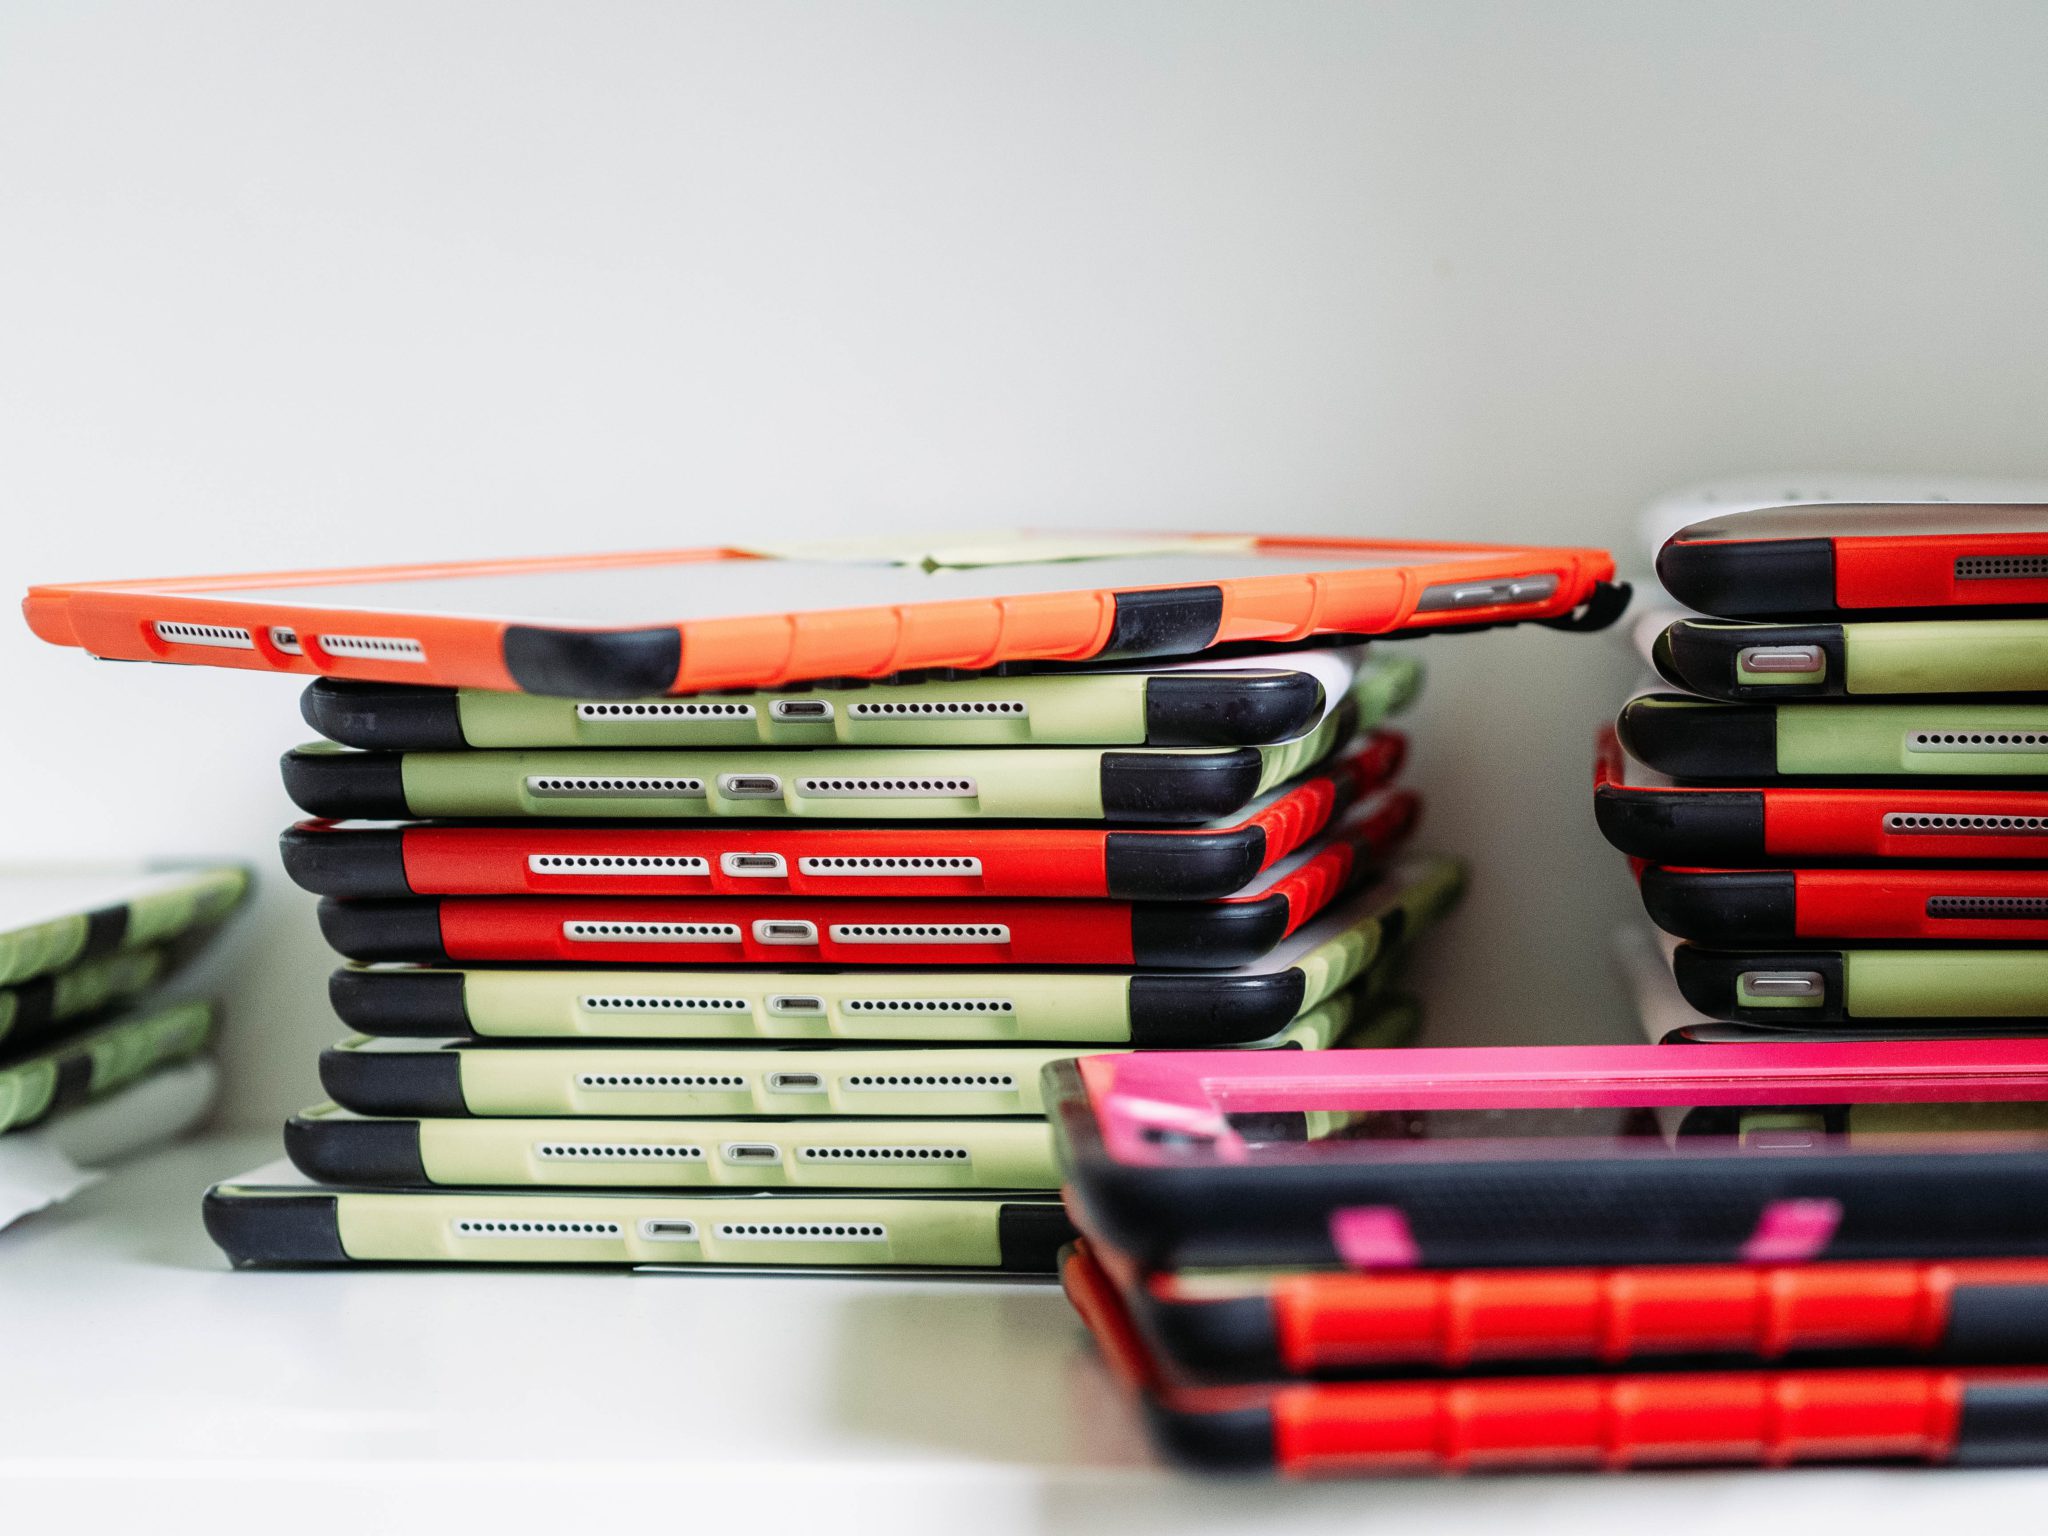 Stacked iPads of different colors.